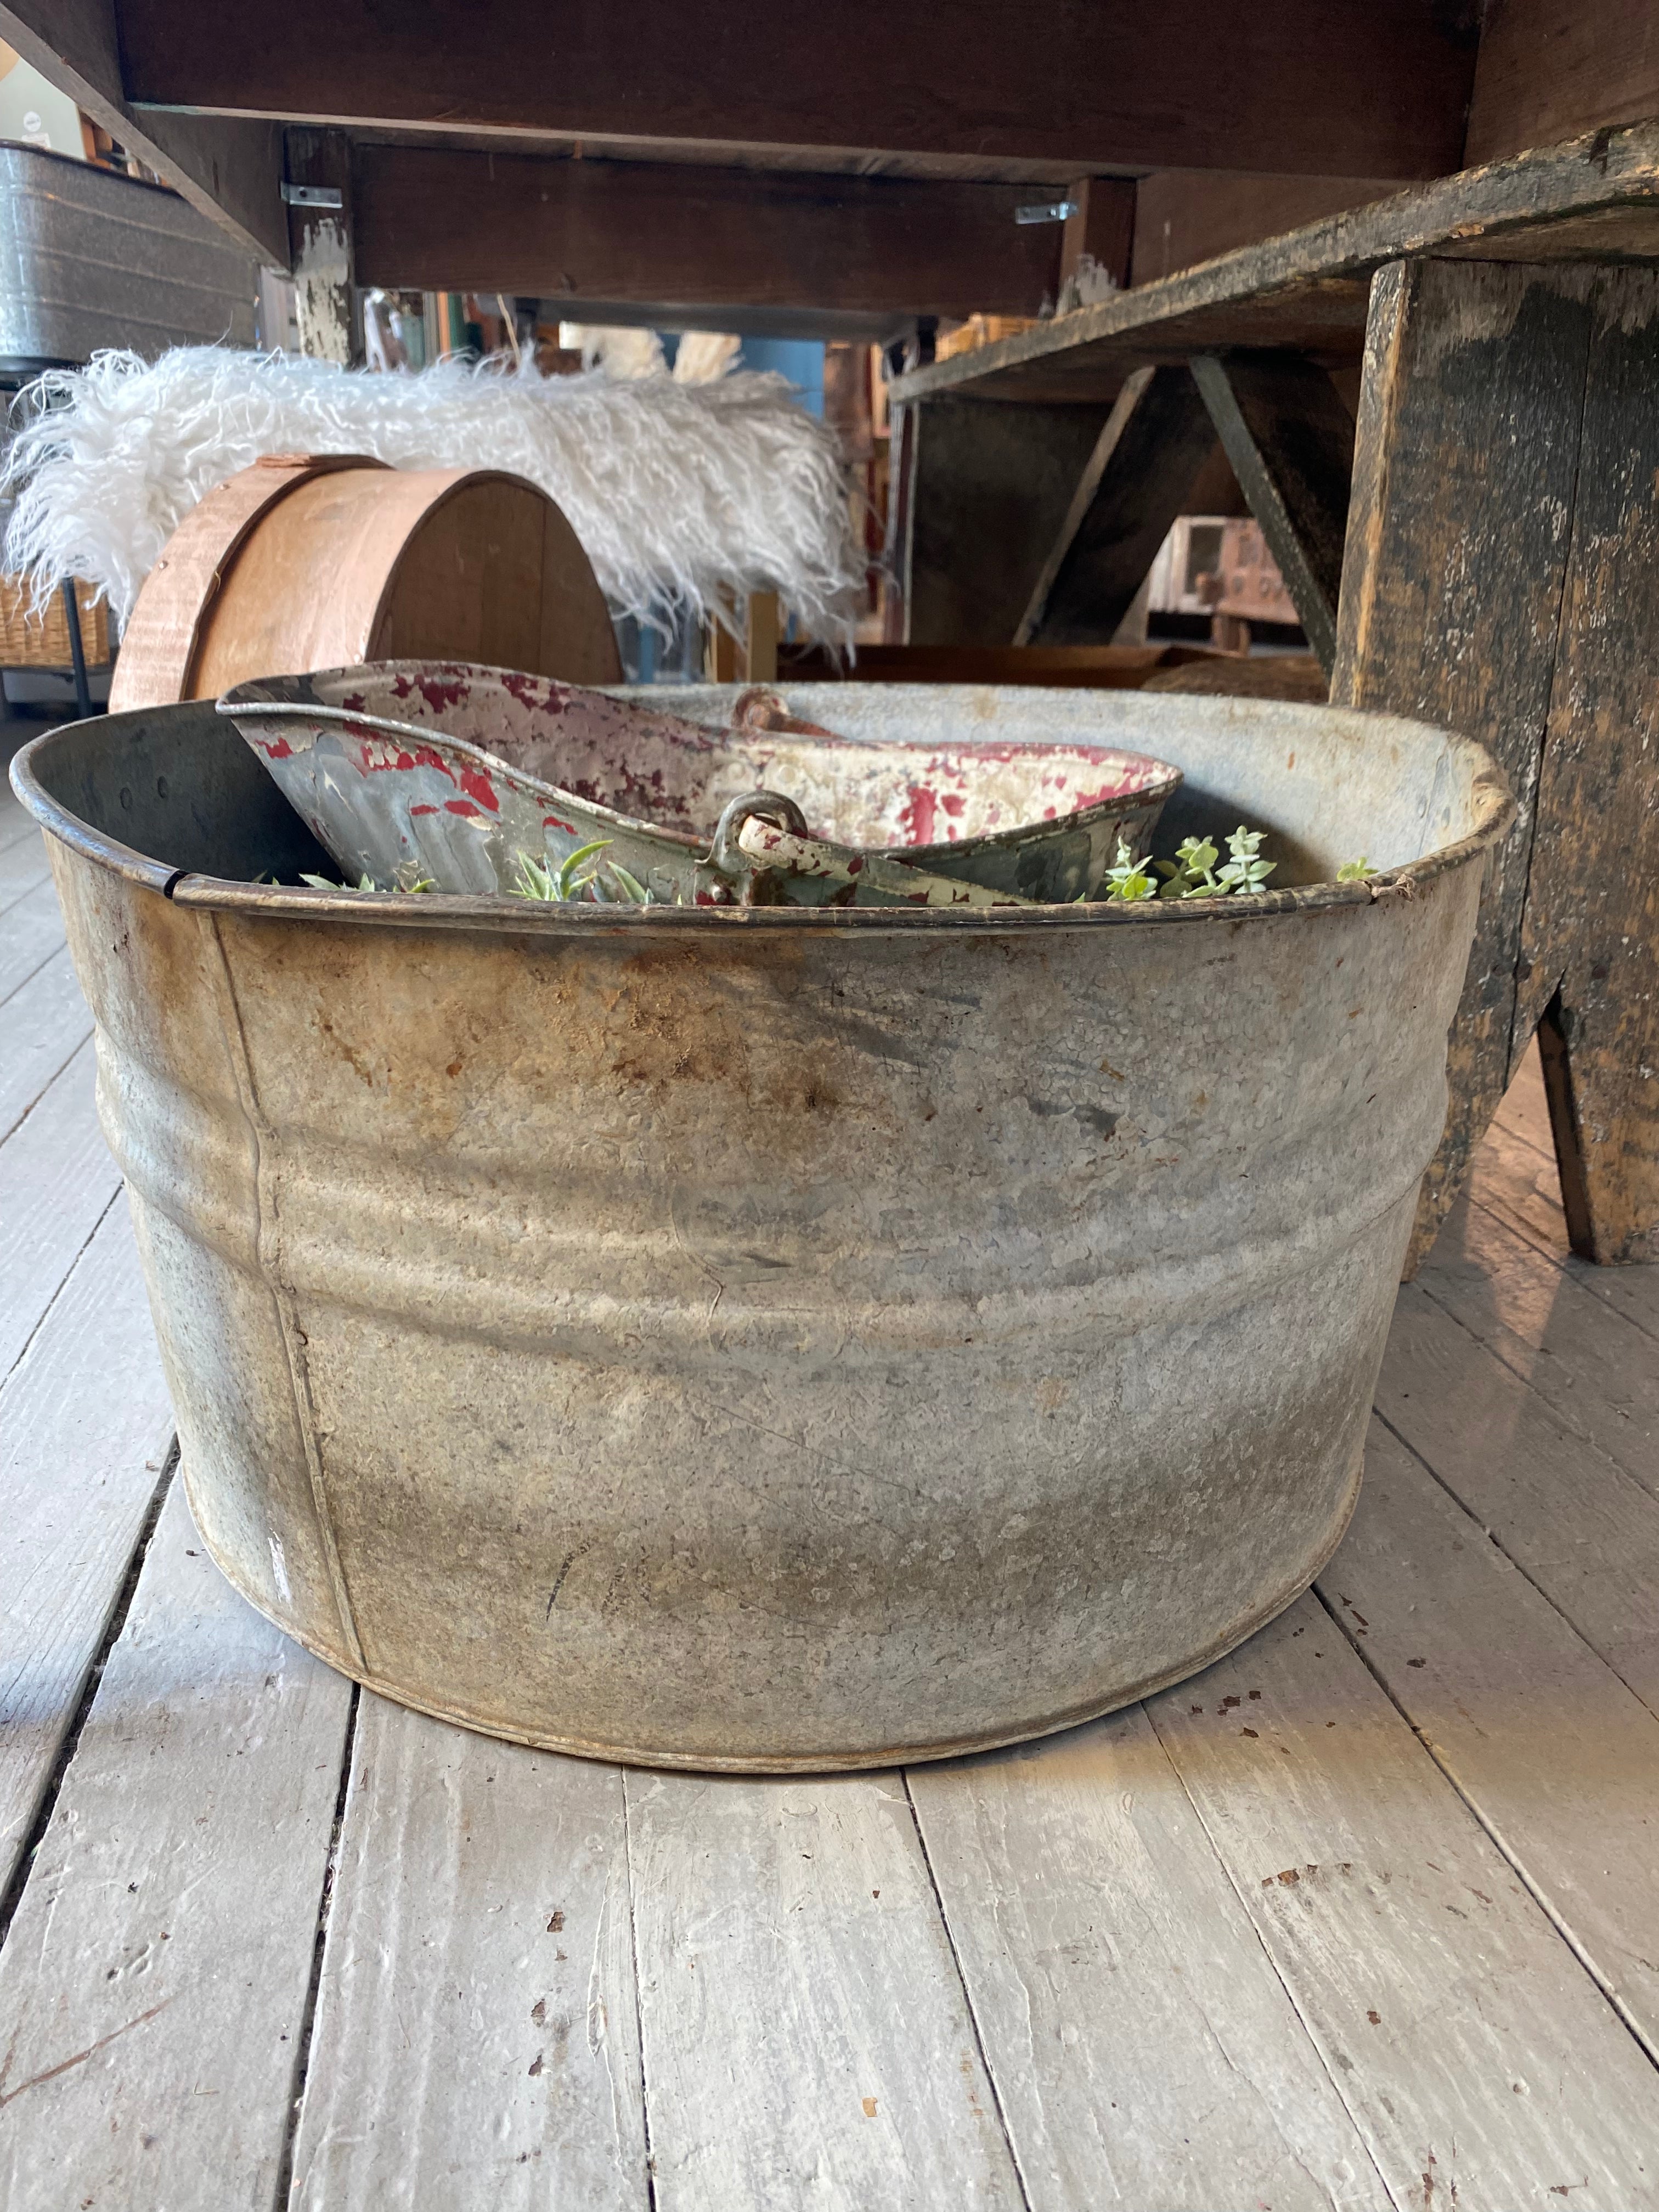 Very Used Vintage Galvanized Tub The Mustard Seed Collection, The Seed